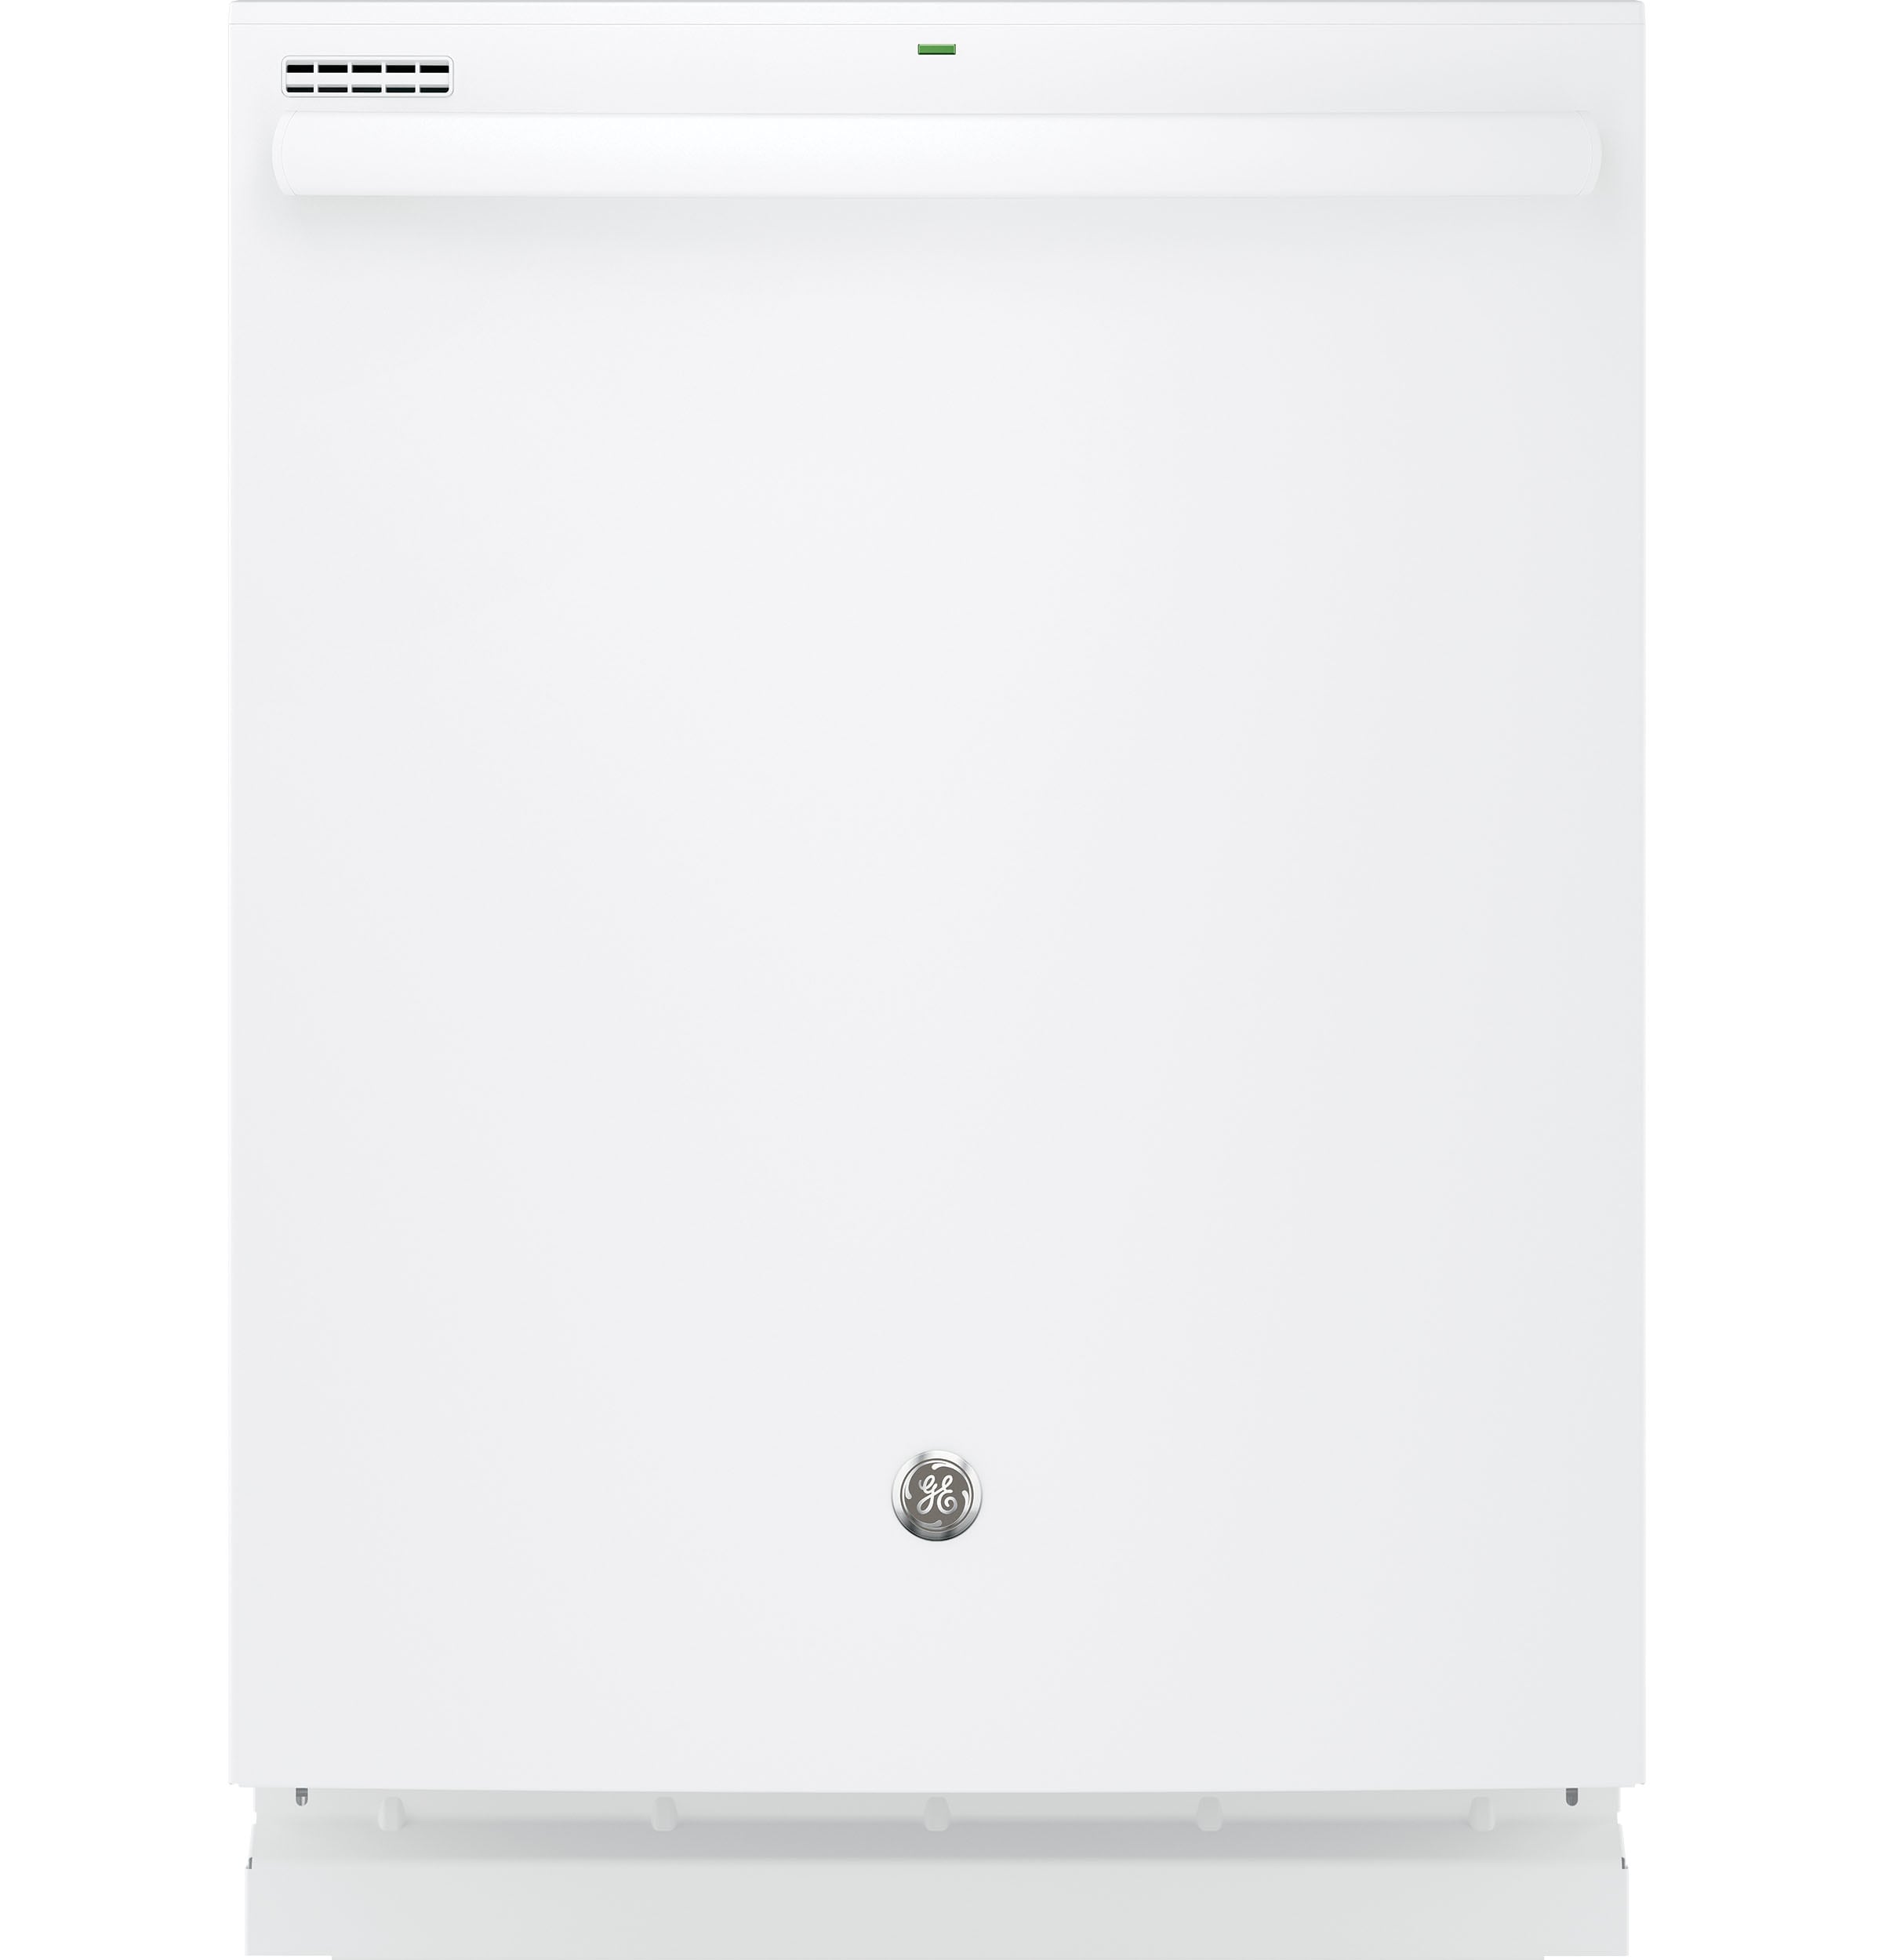 GE Top Control 24-in Built-In Dishwasher (White) ENERGY STAR, 51-dBA at ...